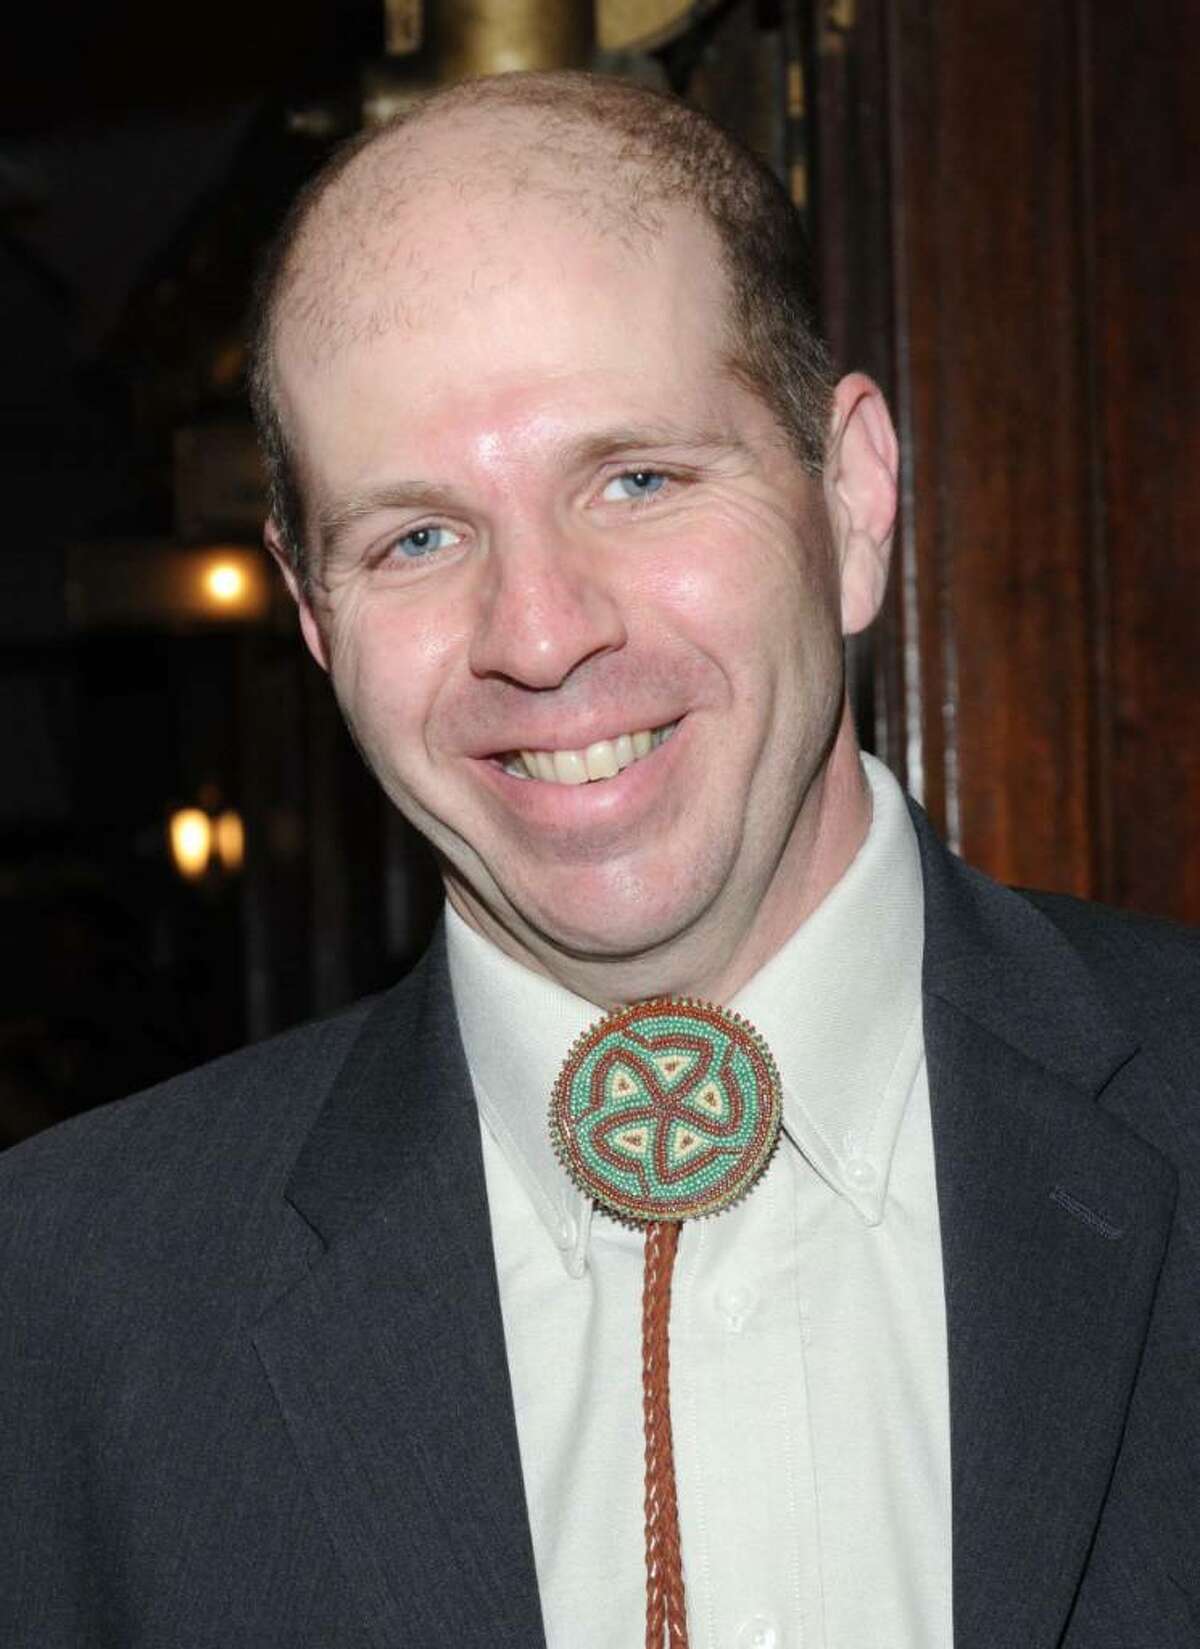 Tom Carruthers is the Founder and Executive Director of the Connecticut Film Festival.